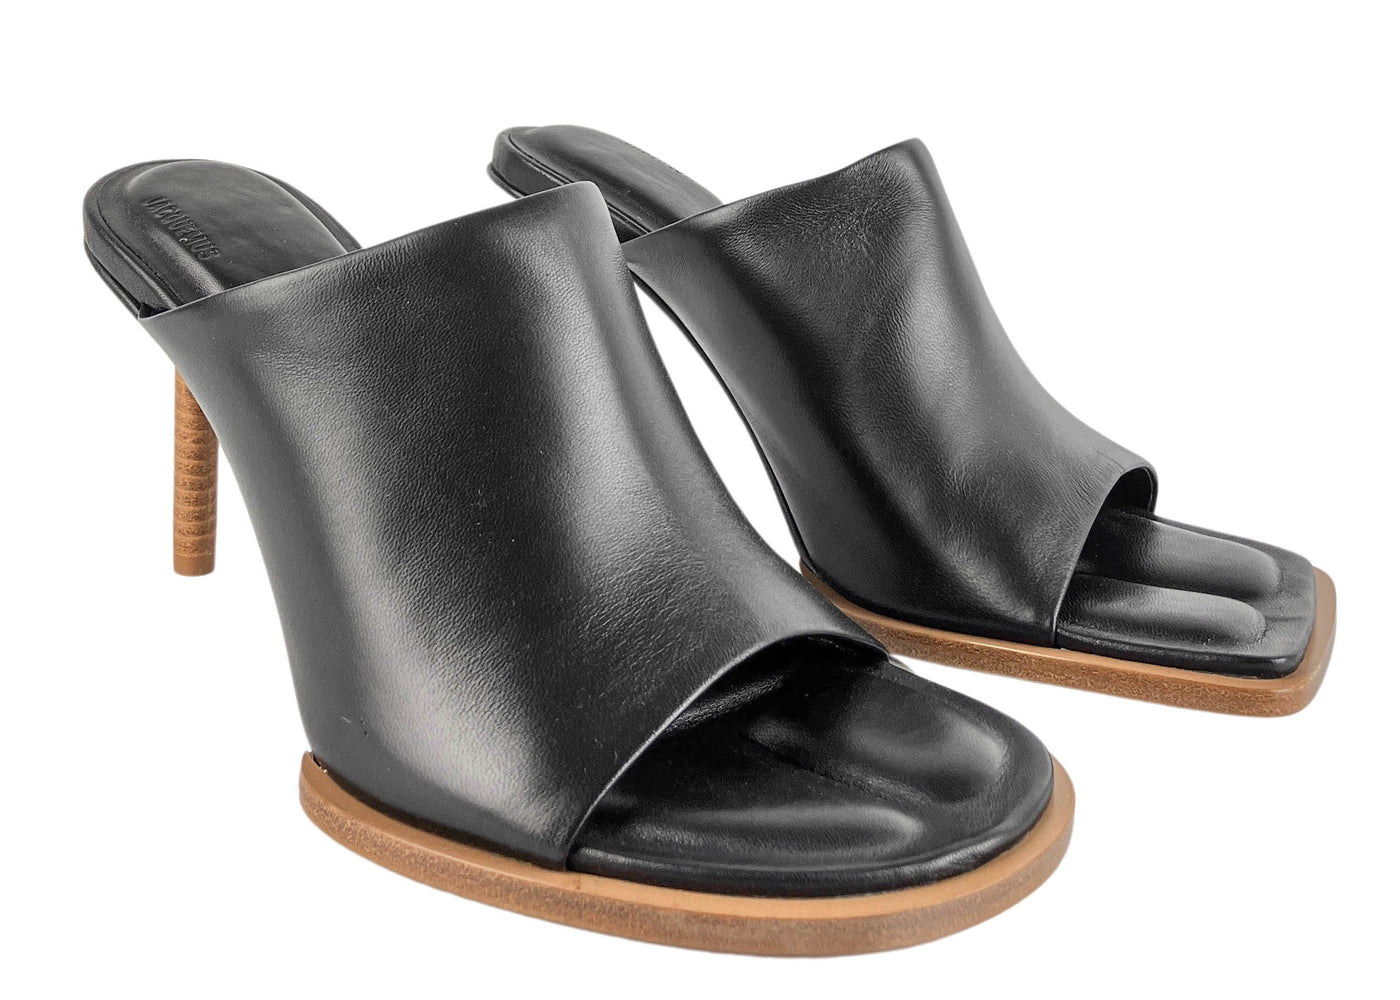 Jacquemus Carre Mules in Black - Discounts on Jacquemus at UAL